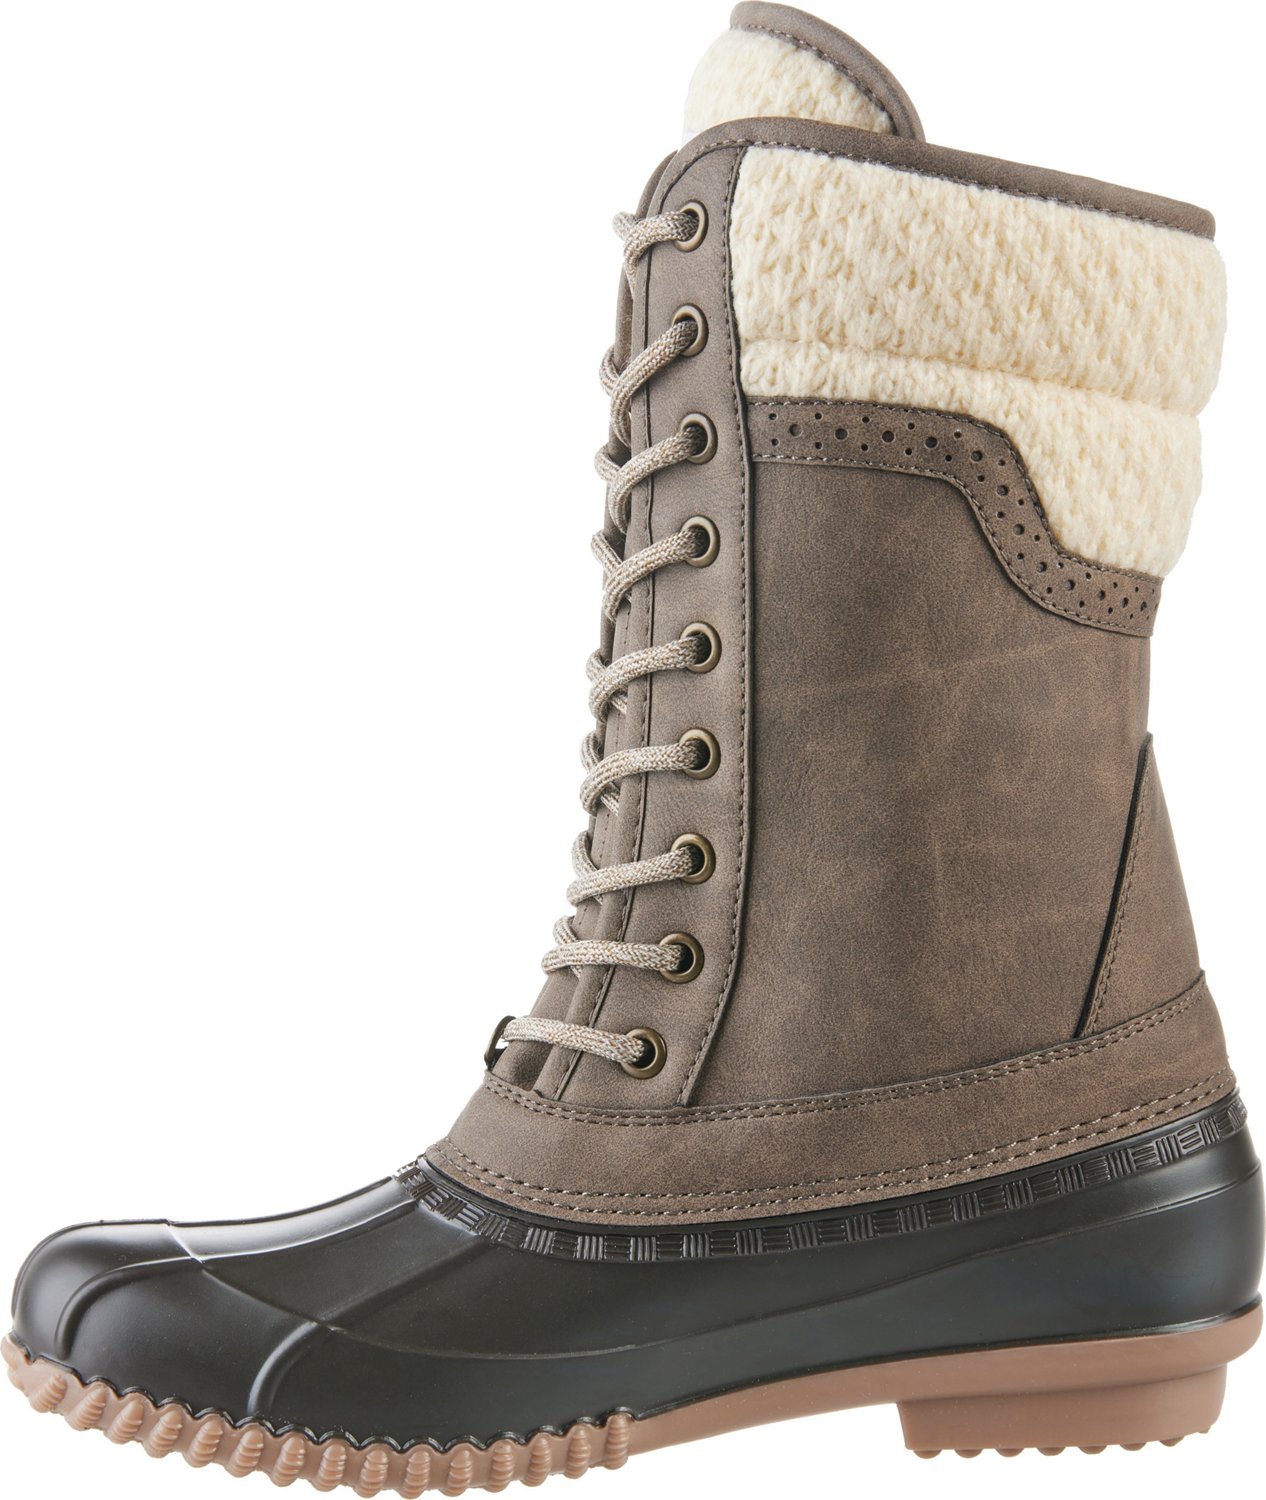 sorel women's conquest carly